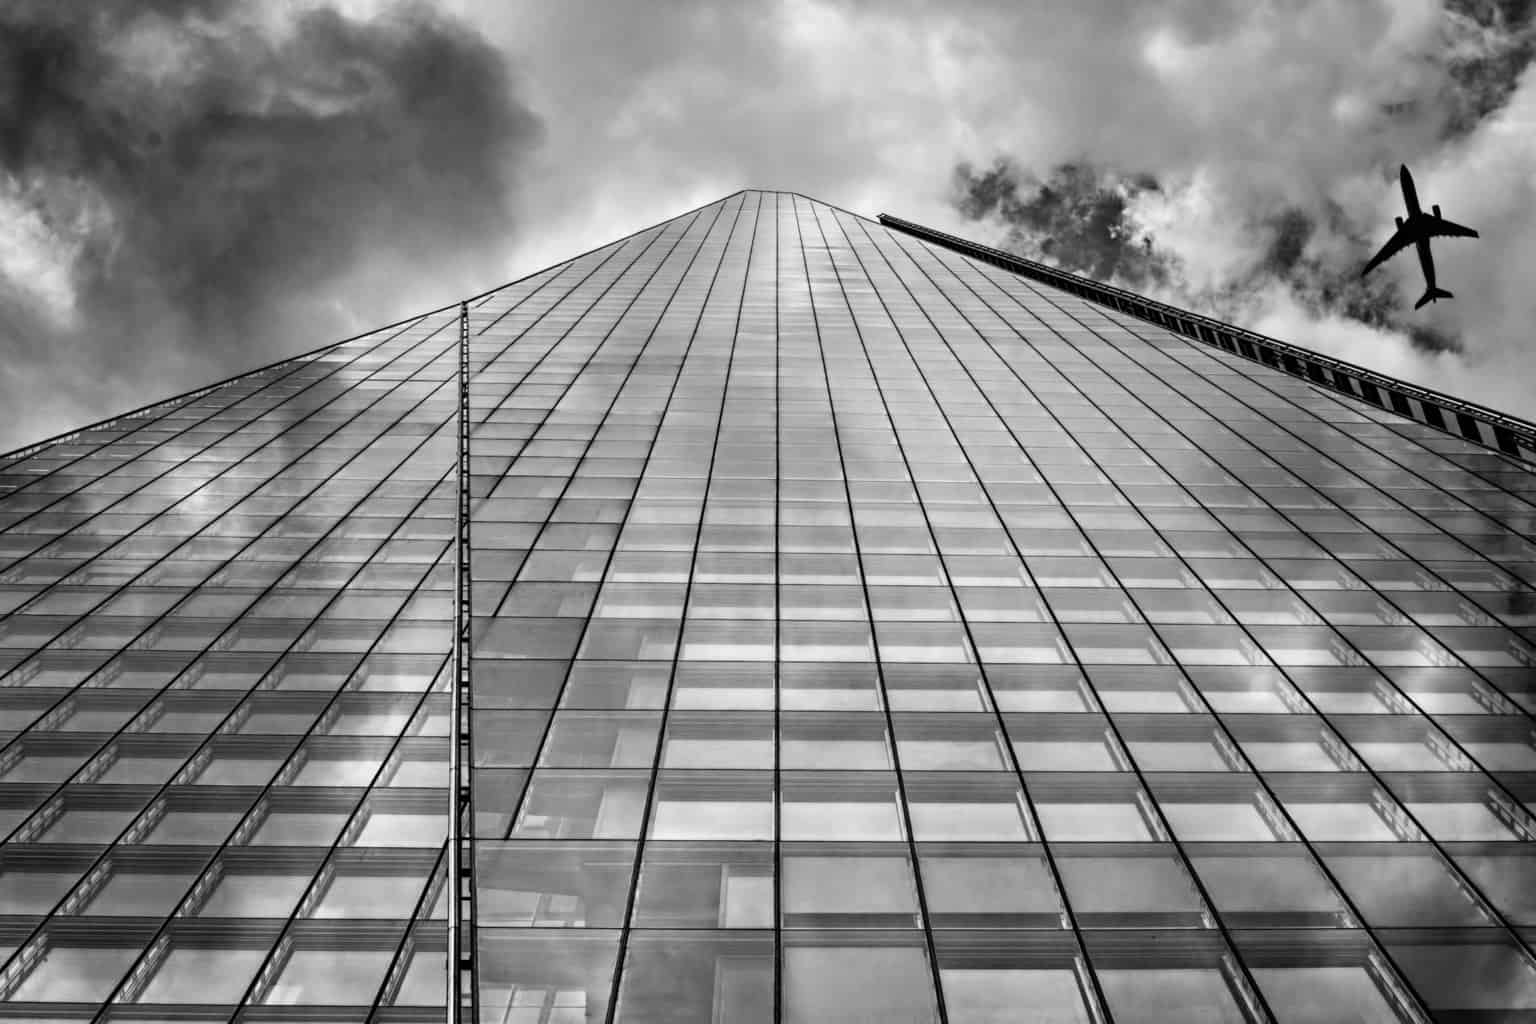  The Shard, London by Rick McEvoy architectural photographer   